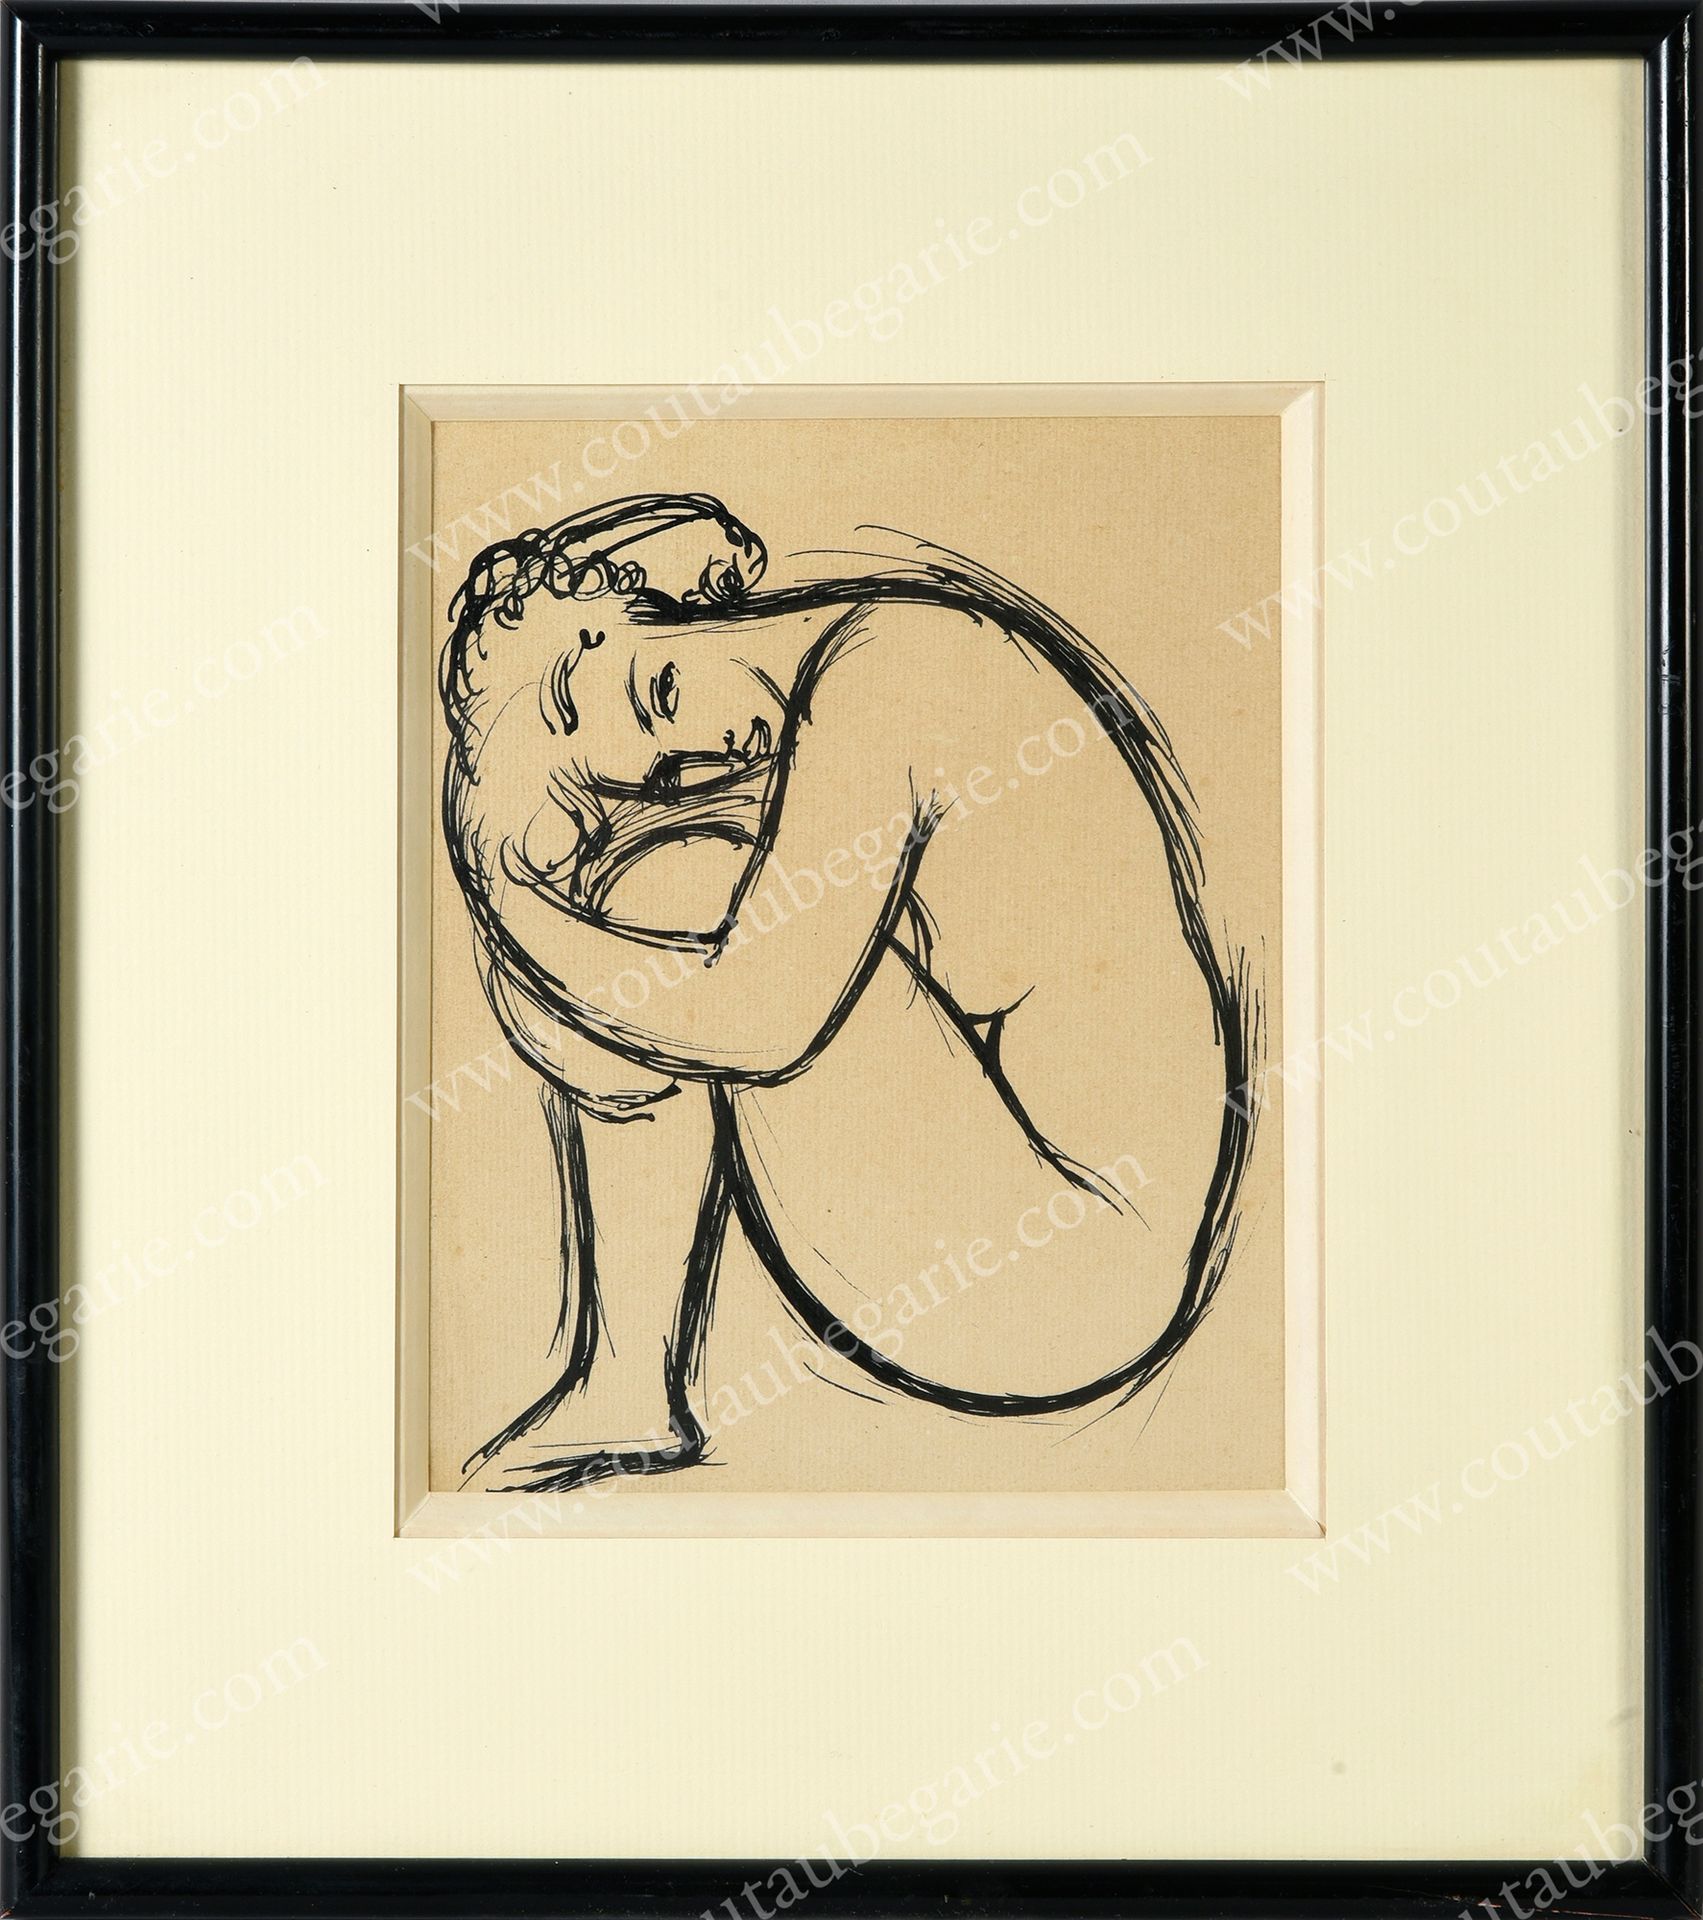 ÉCOLE FRANCAISE DU XXe SIÈCLE. Young woman embracing her knees.
Brown ink drawin&hellip;